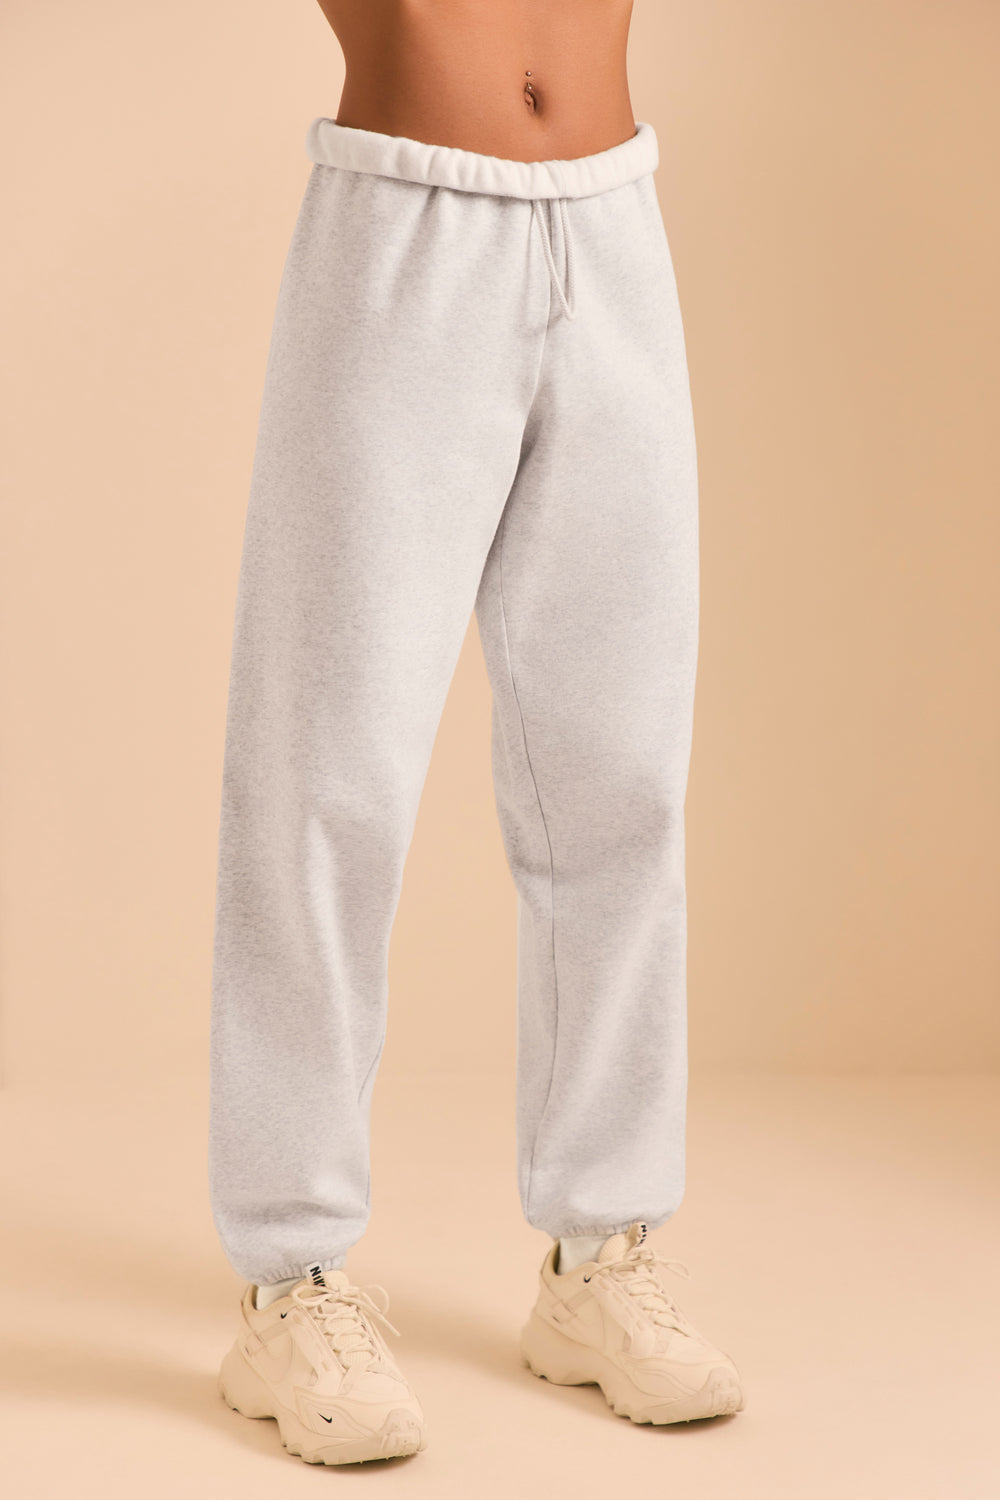 Pacific Relaxed Fit Joggers in Heather Grey